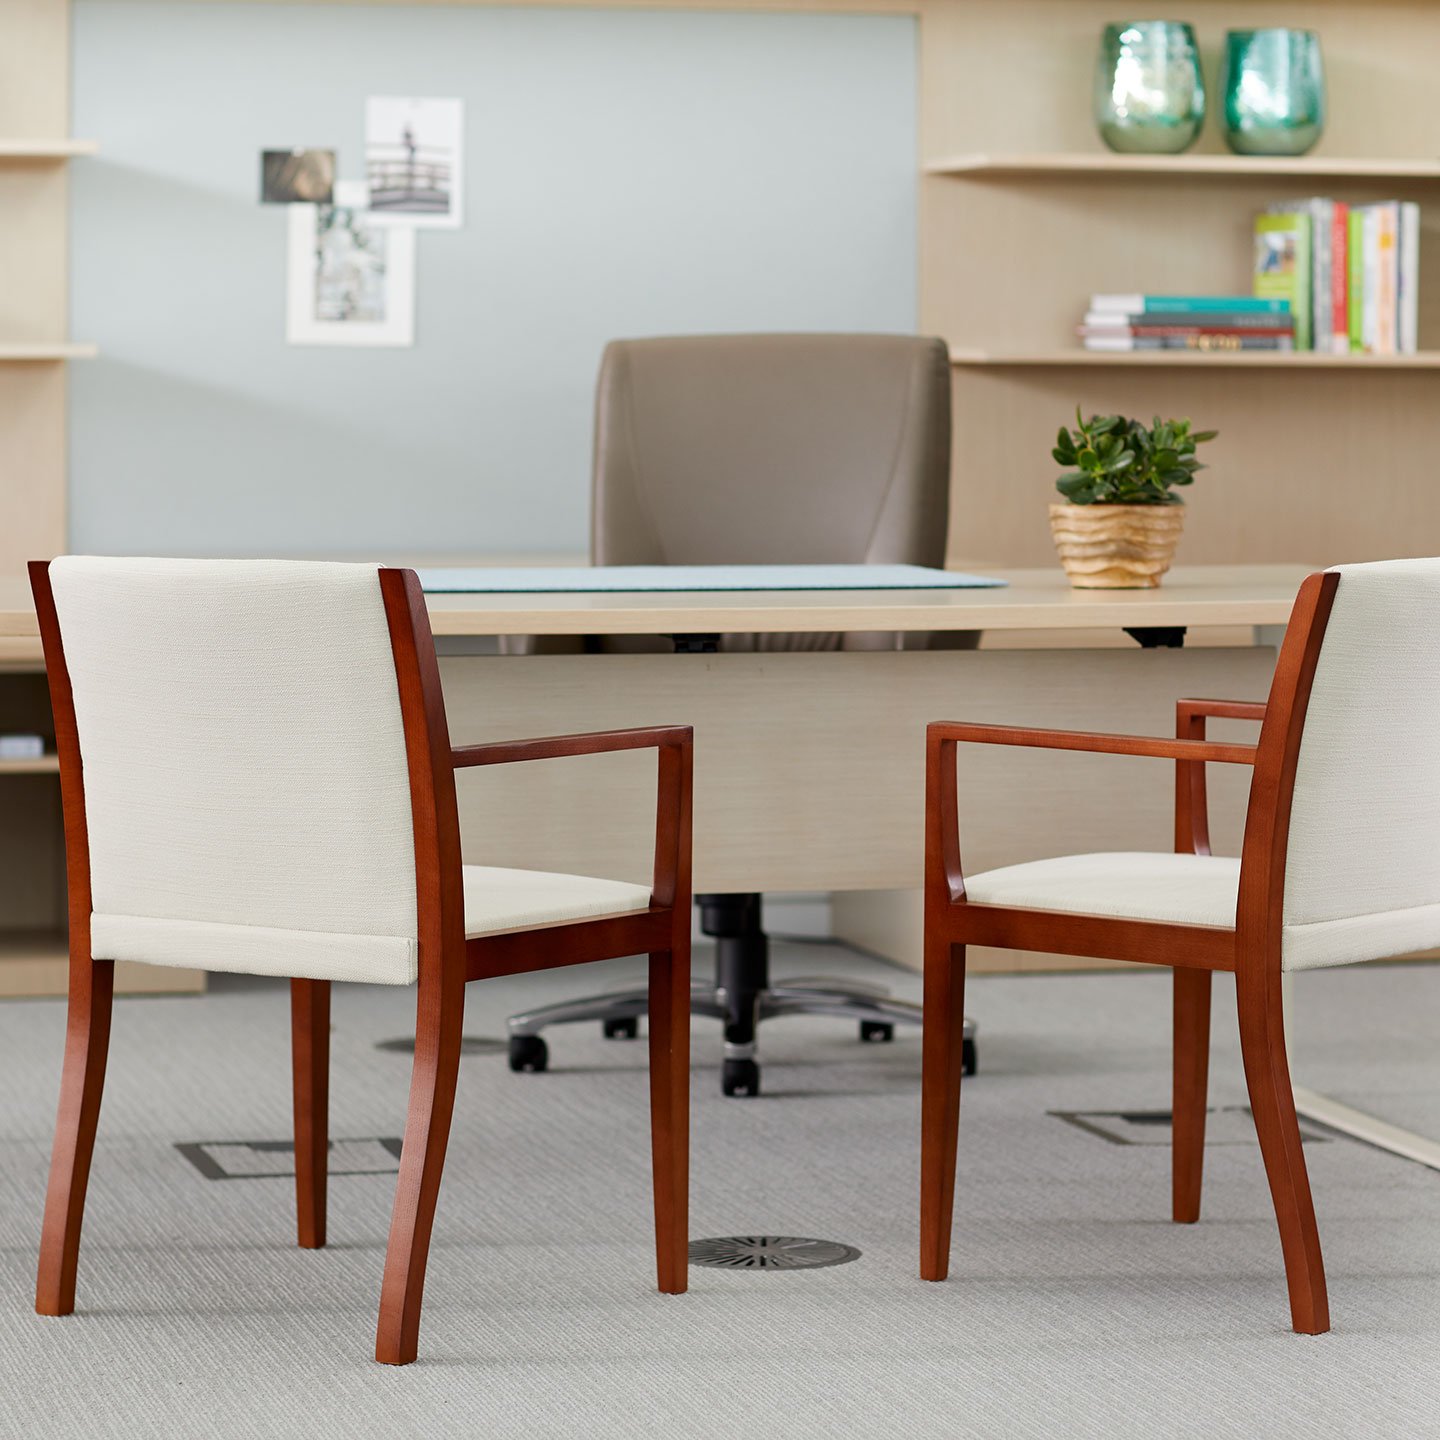 Haworth Candor chairs in off-white and dark brown in a office room at a large office desk